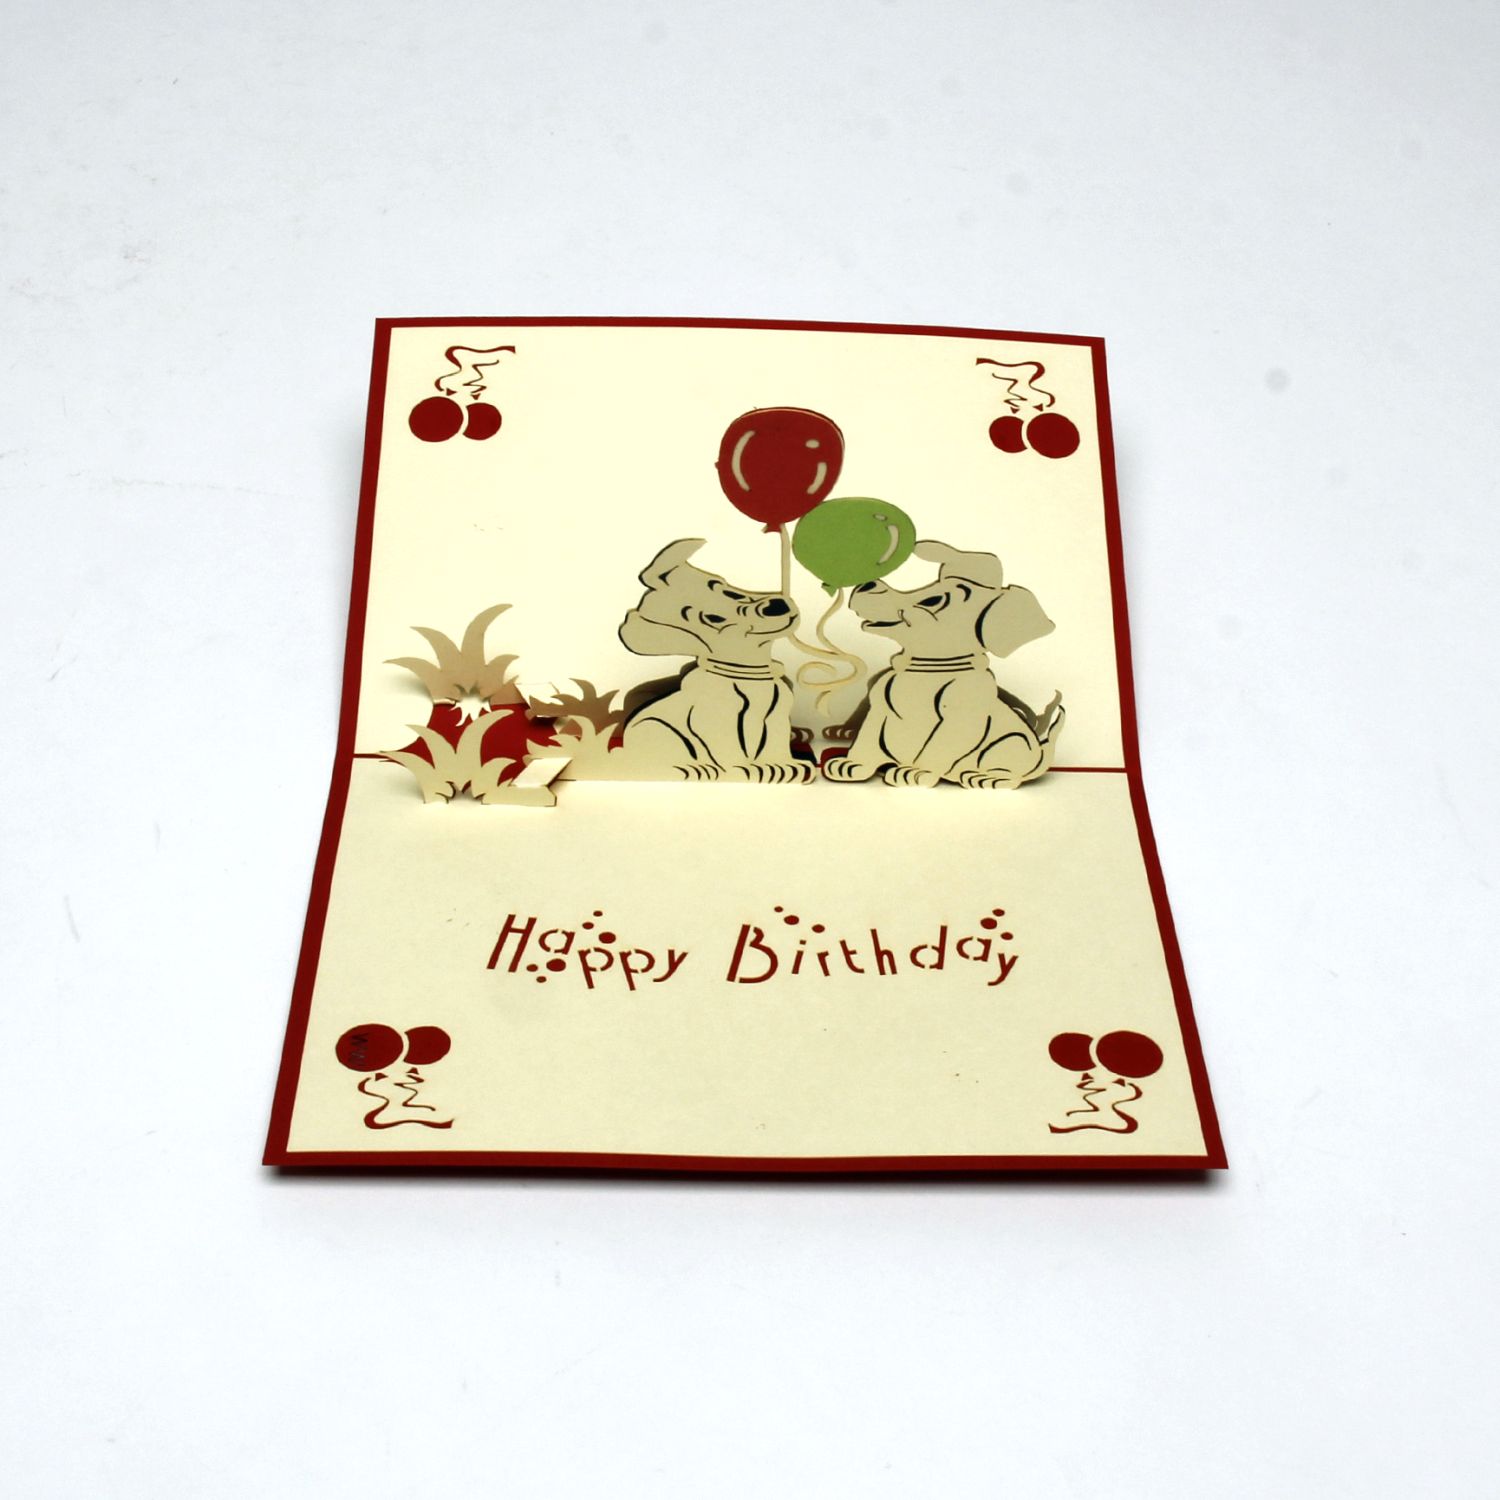 Roses without Thorns: Birthday Dogs Product Image 2 of 2